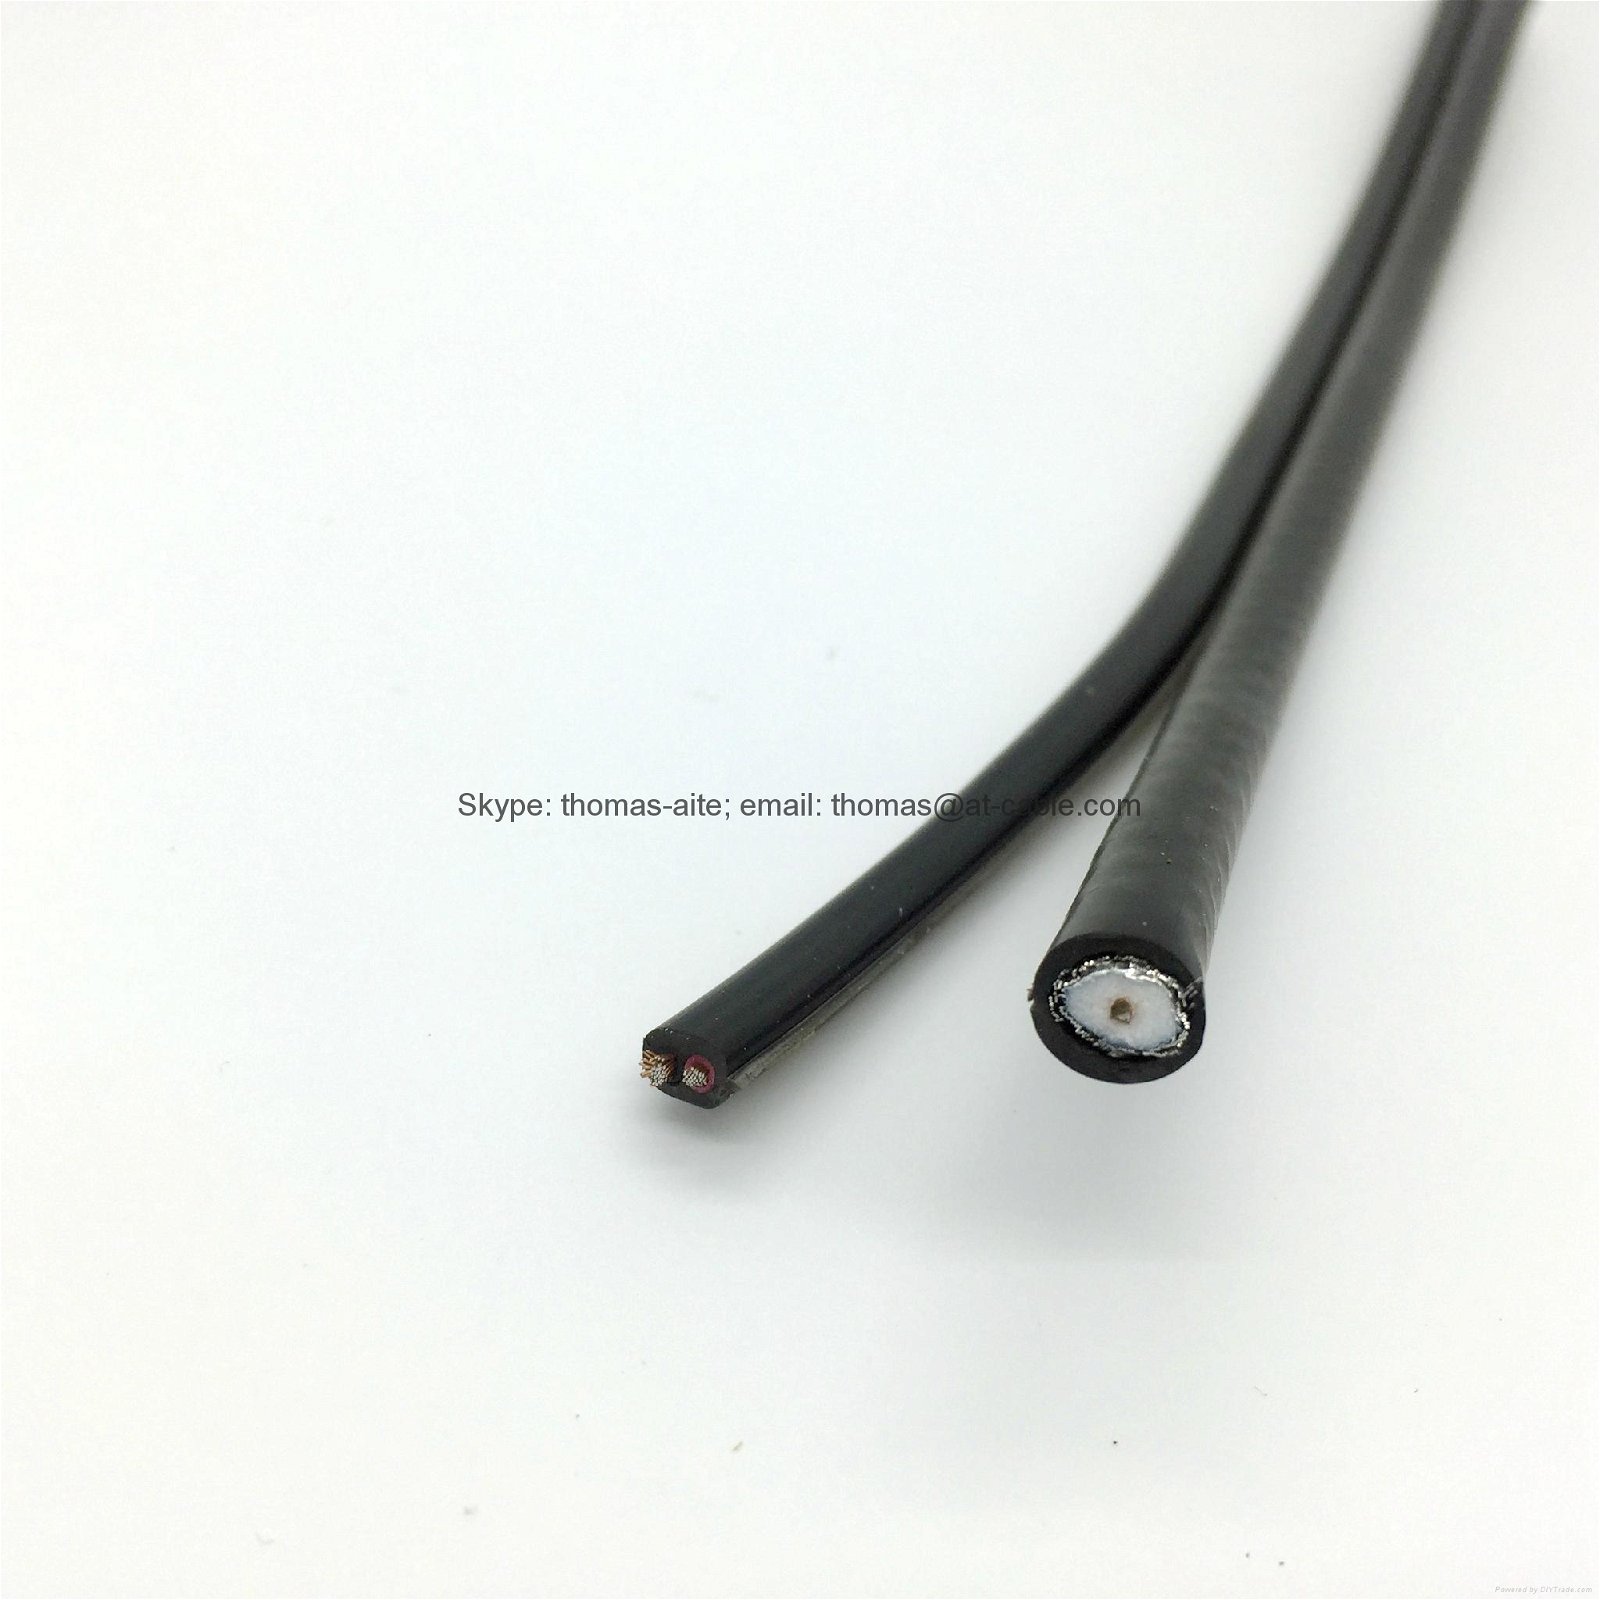 8 FIGURE RG59 CCTV CABLE